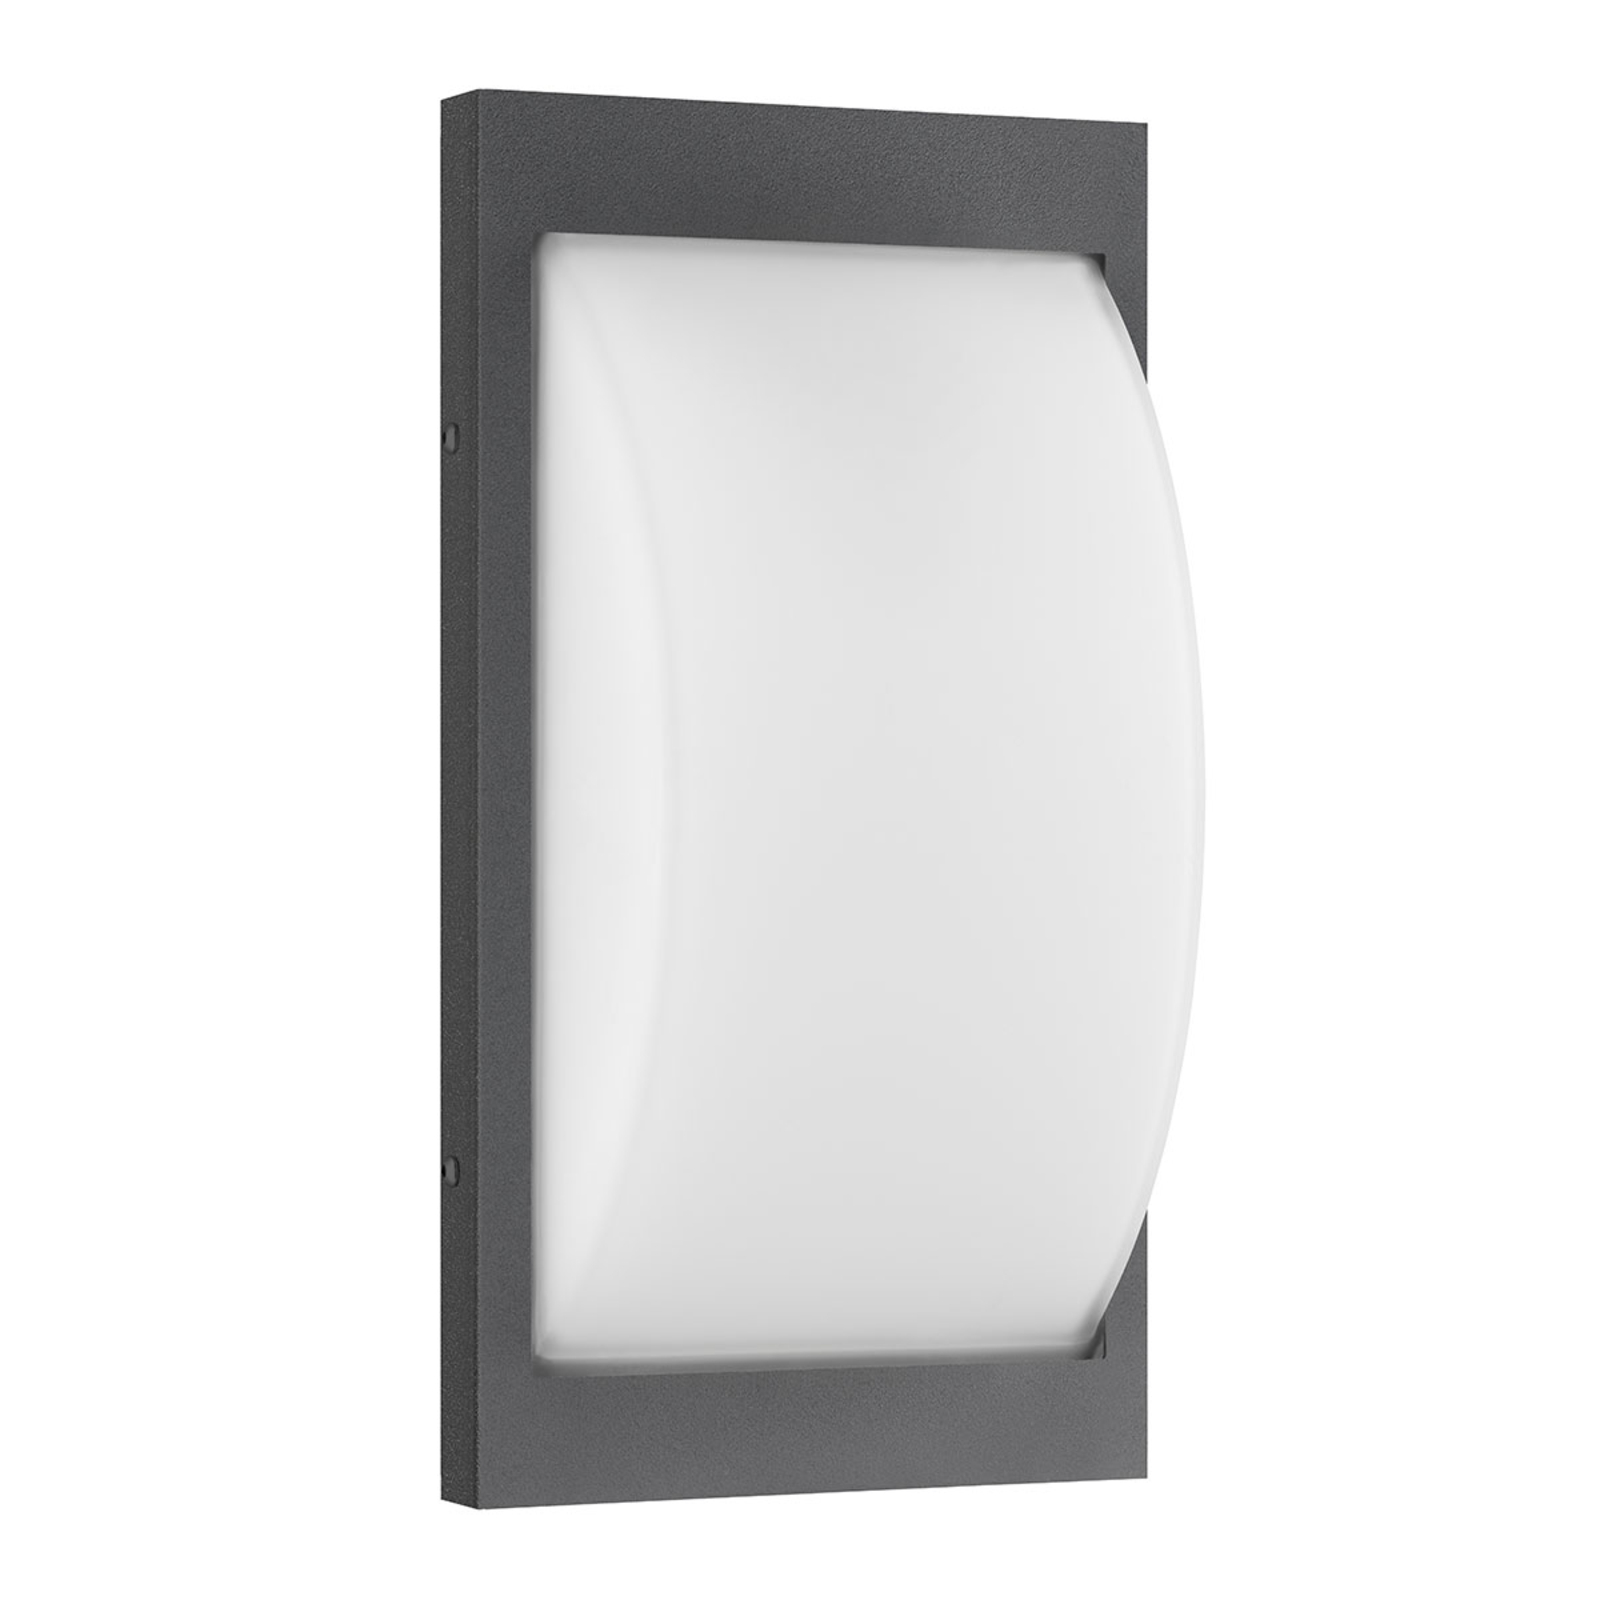 LED outdoor wall light type 069LED graphite